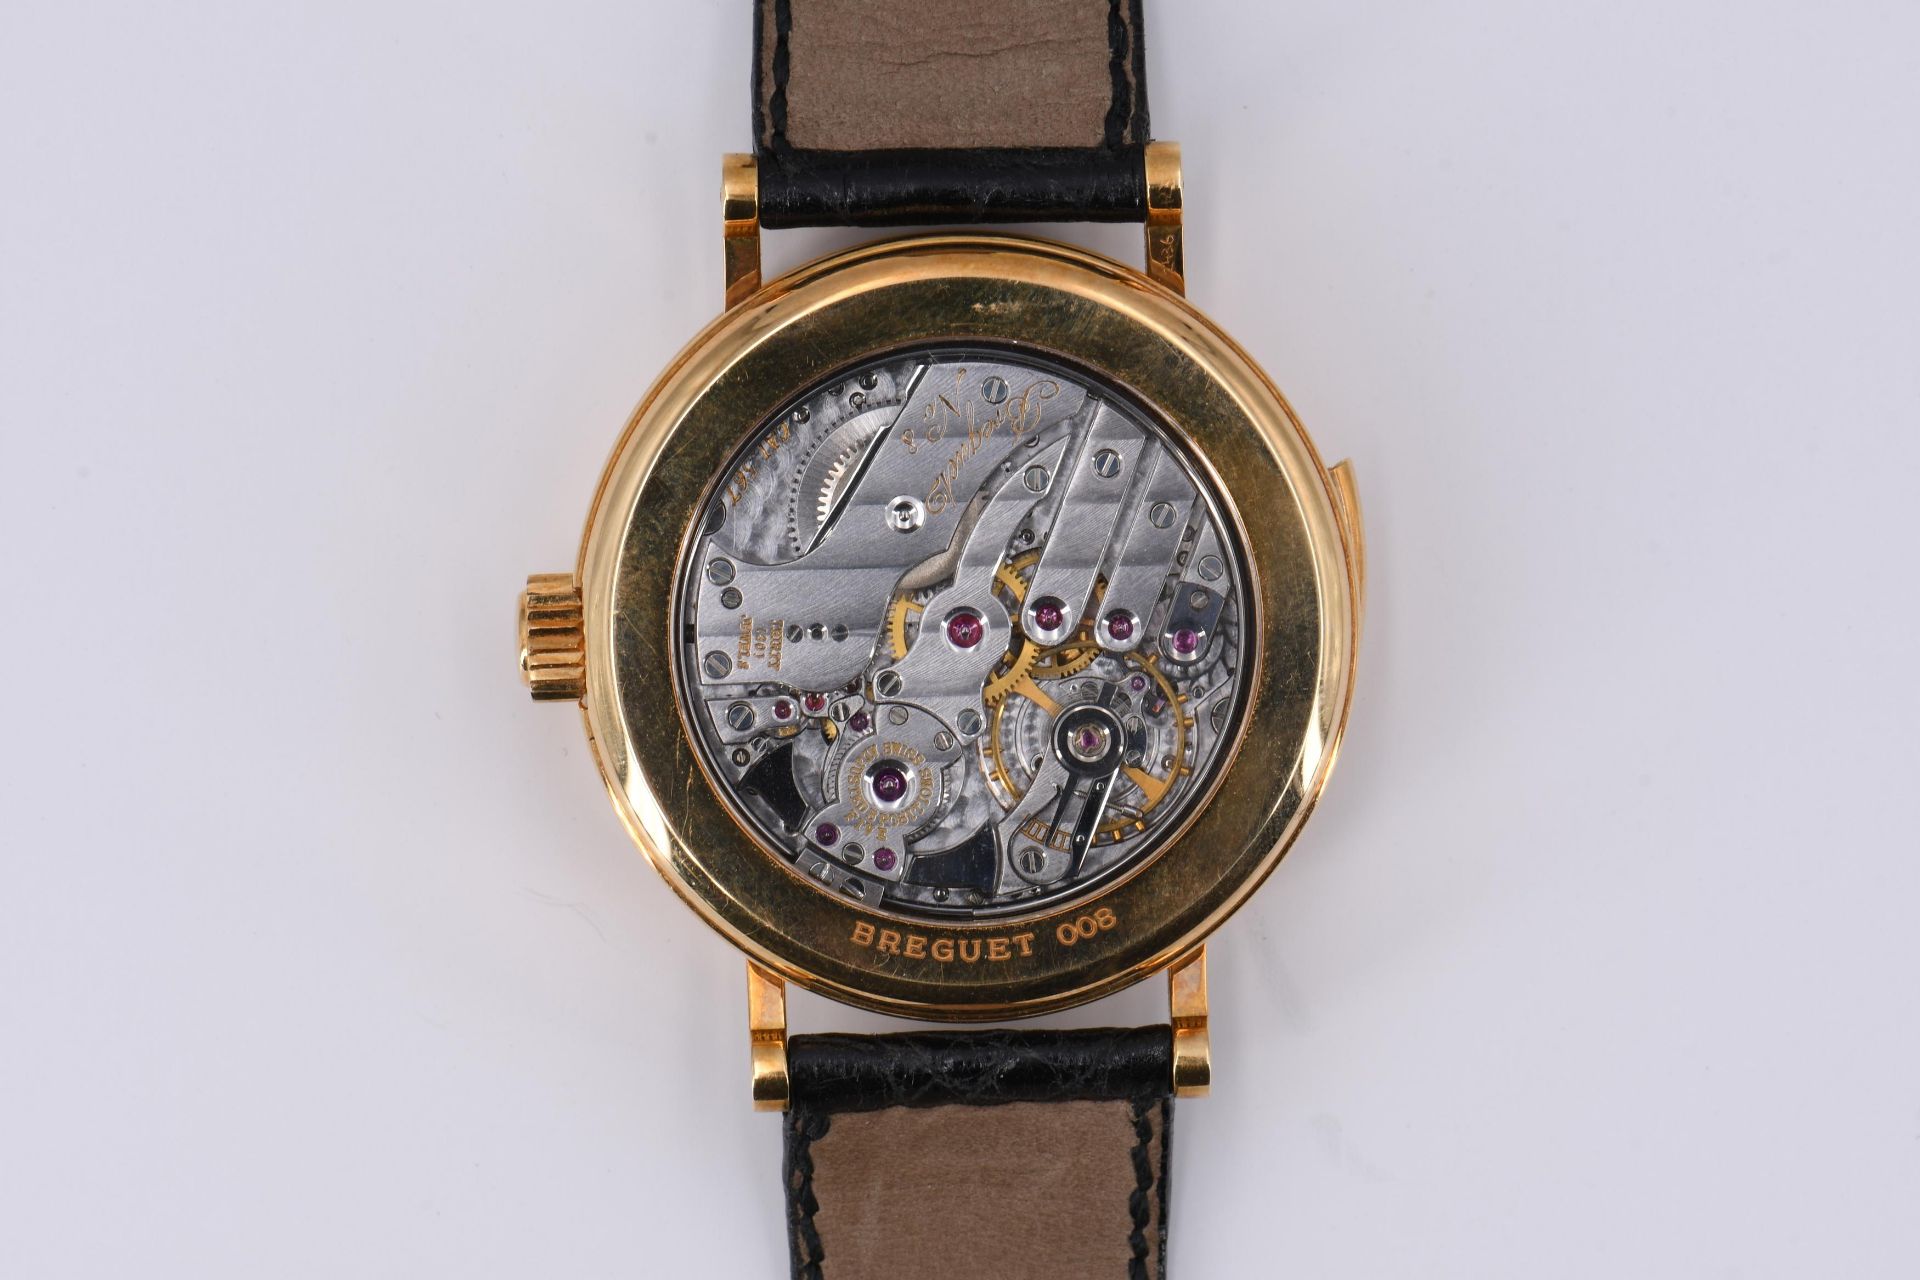 Breguet: Collectable Set of 2 so-called "Souscriptions Watches" - Image 8 of 13